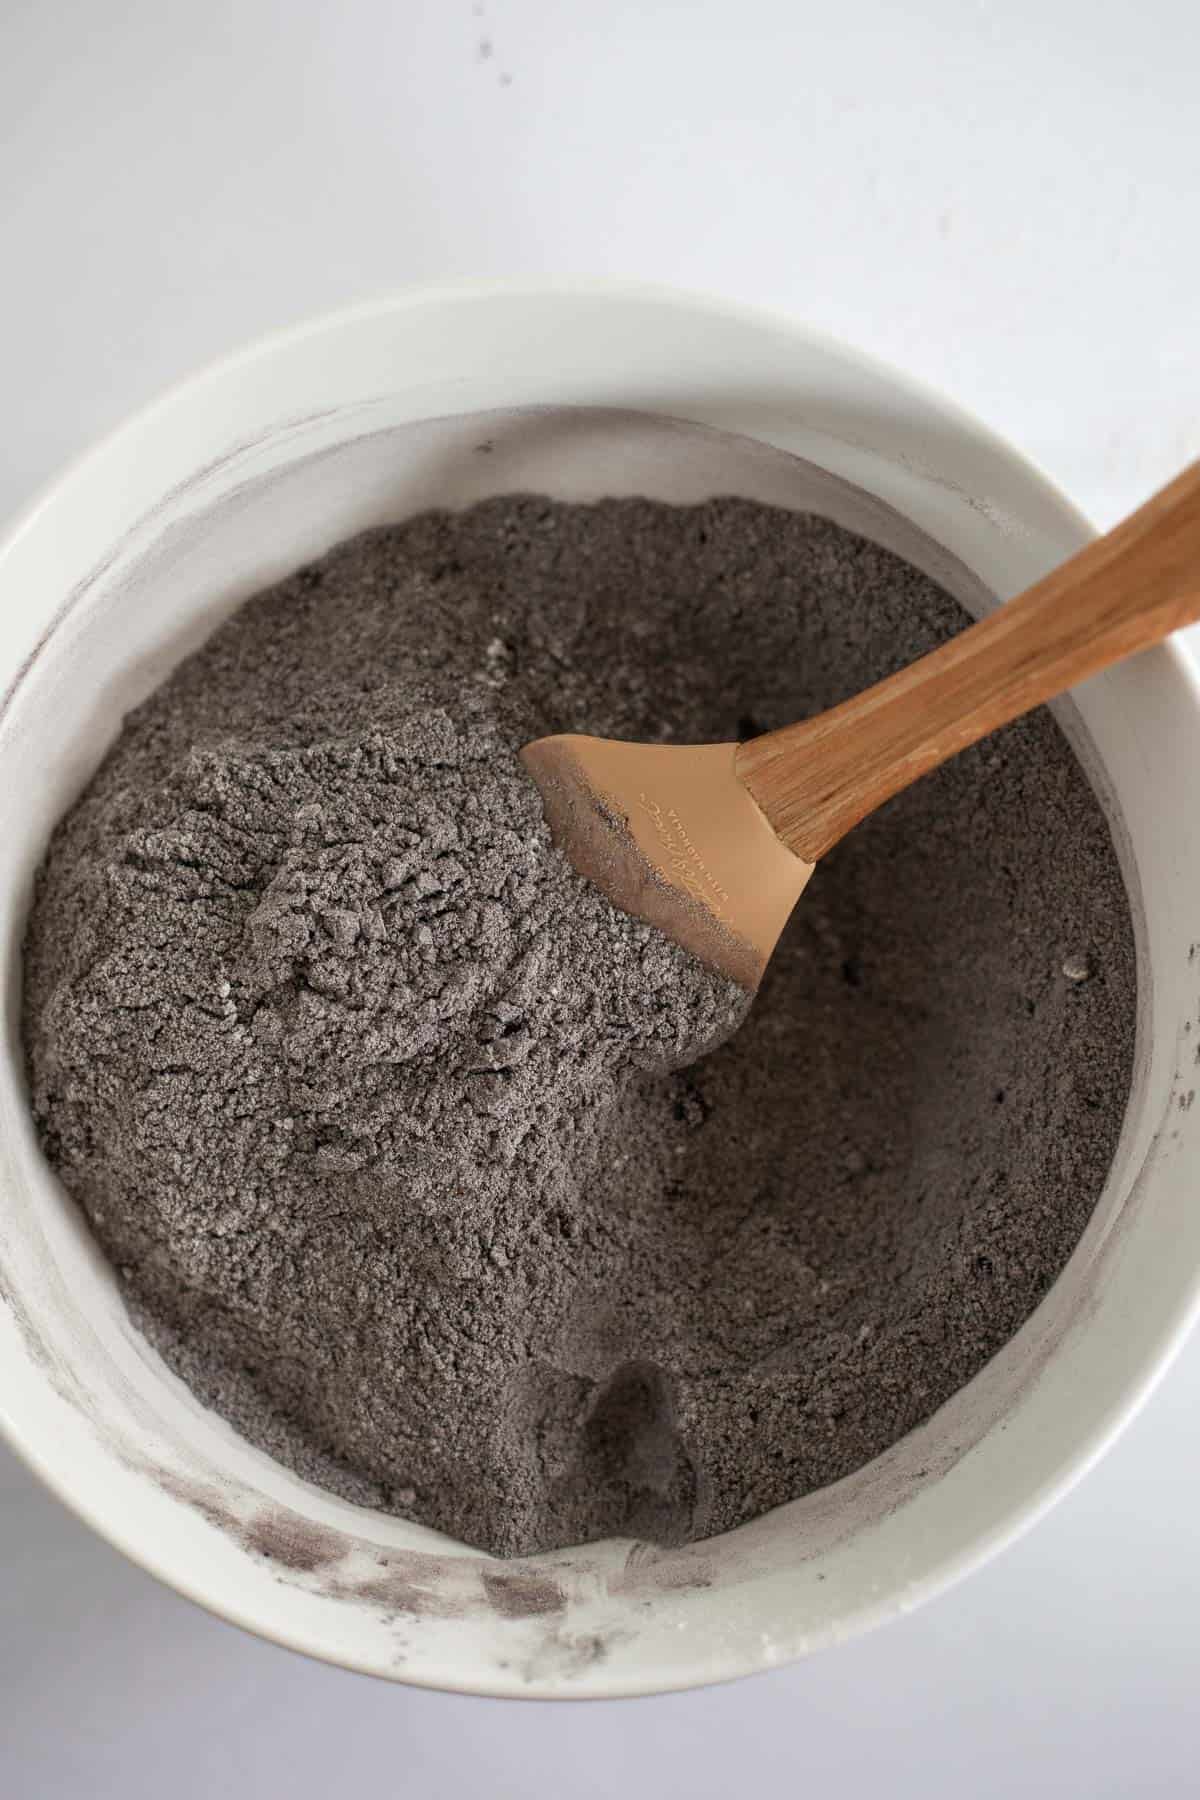 flour, black cocoa powder, and sugar mixed in a white mixing bowl.